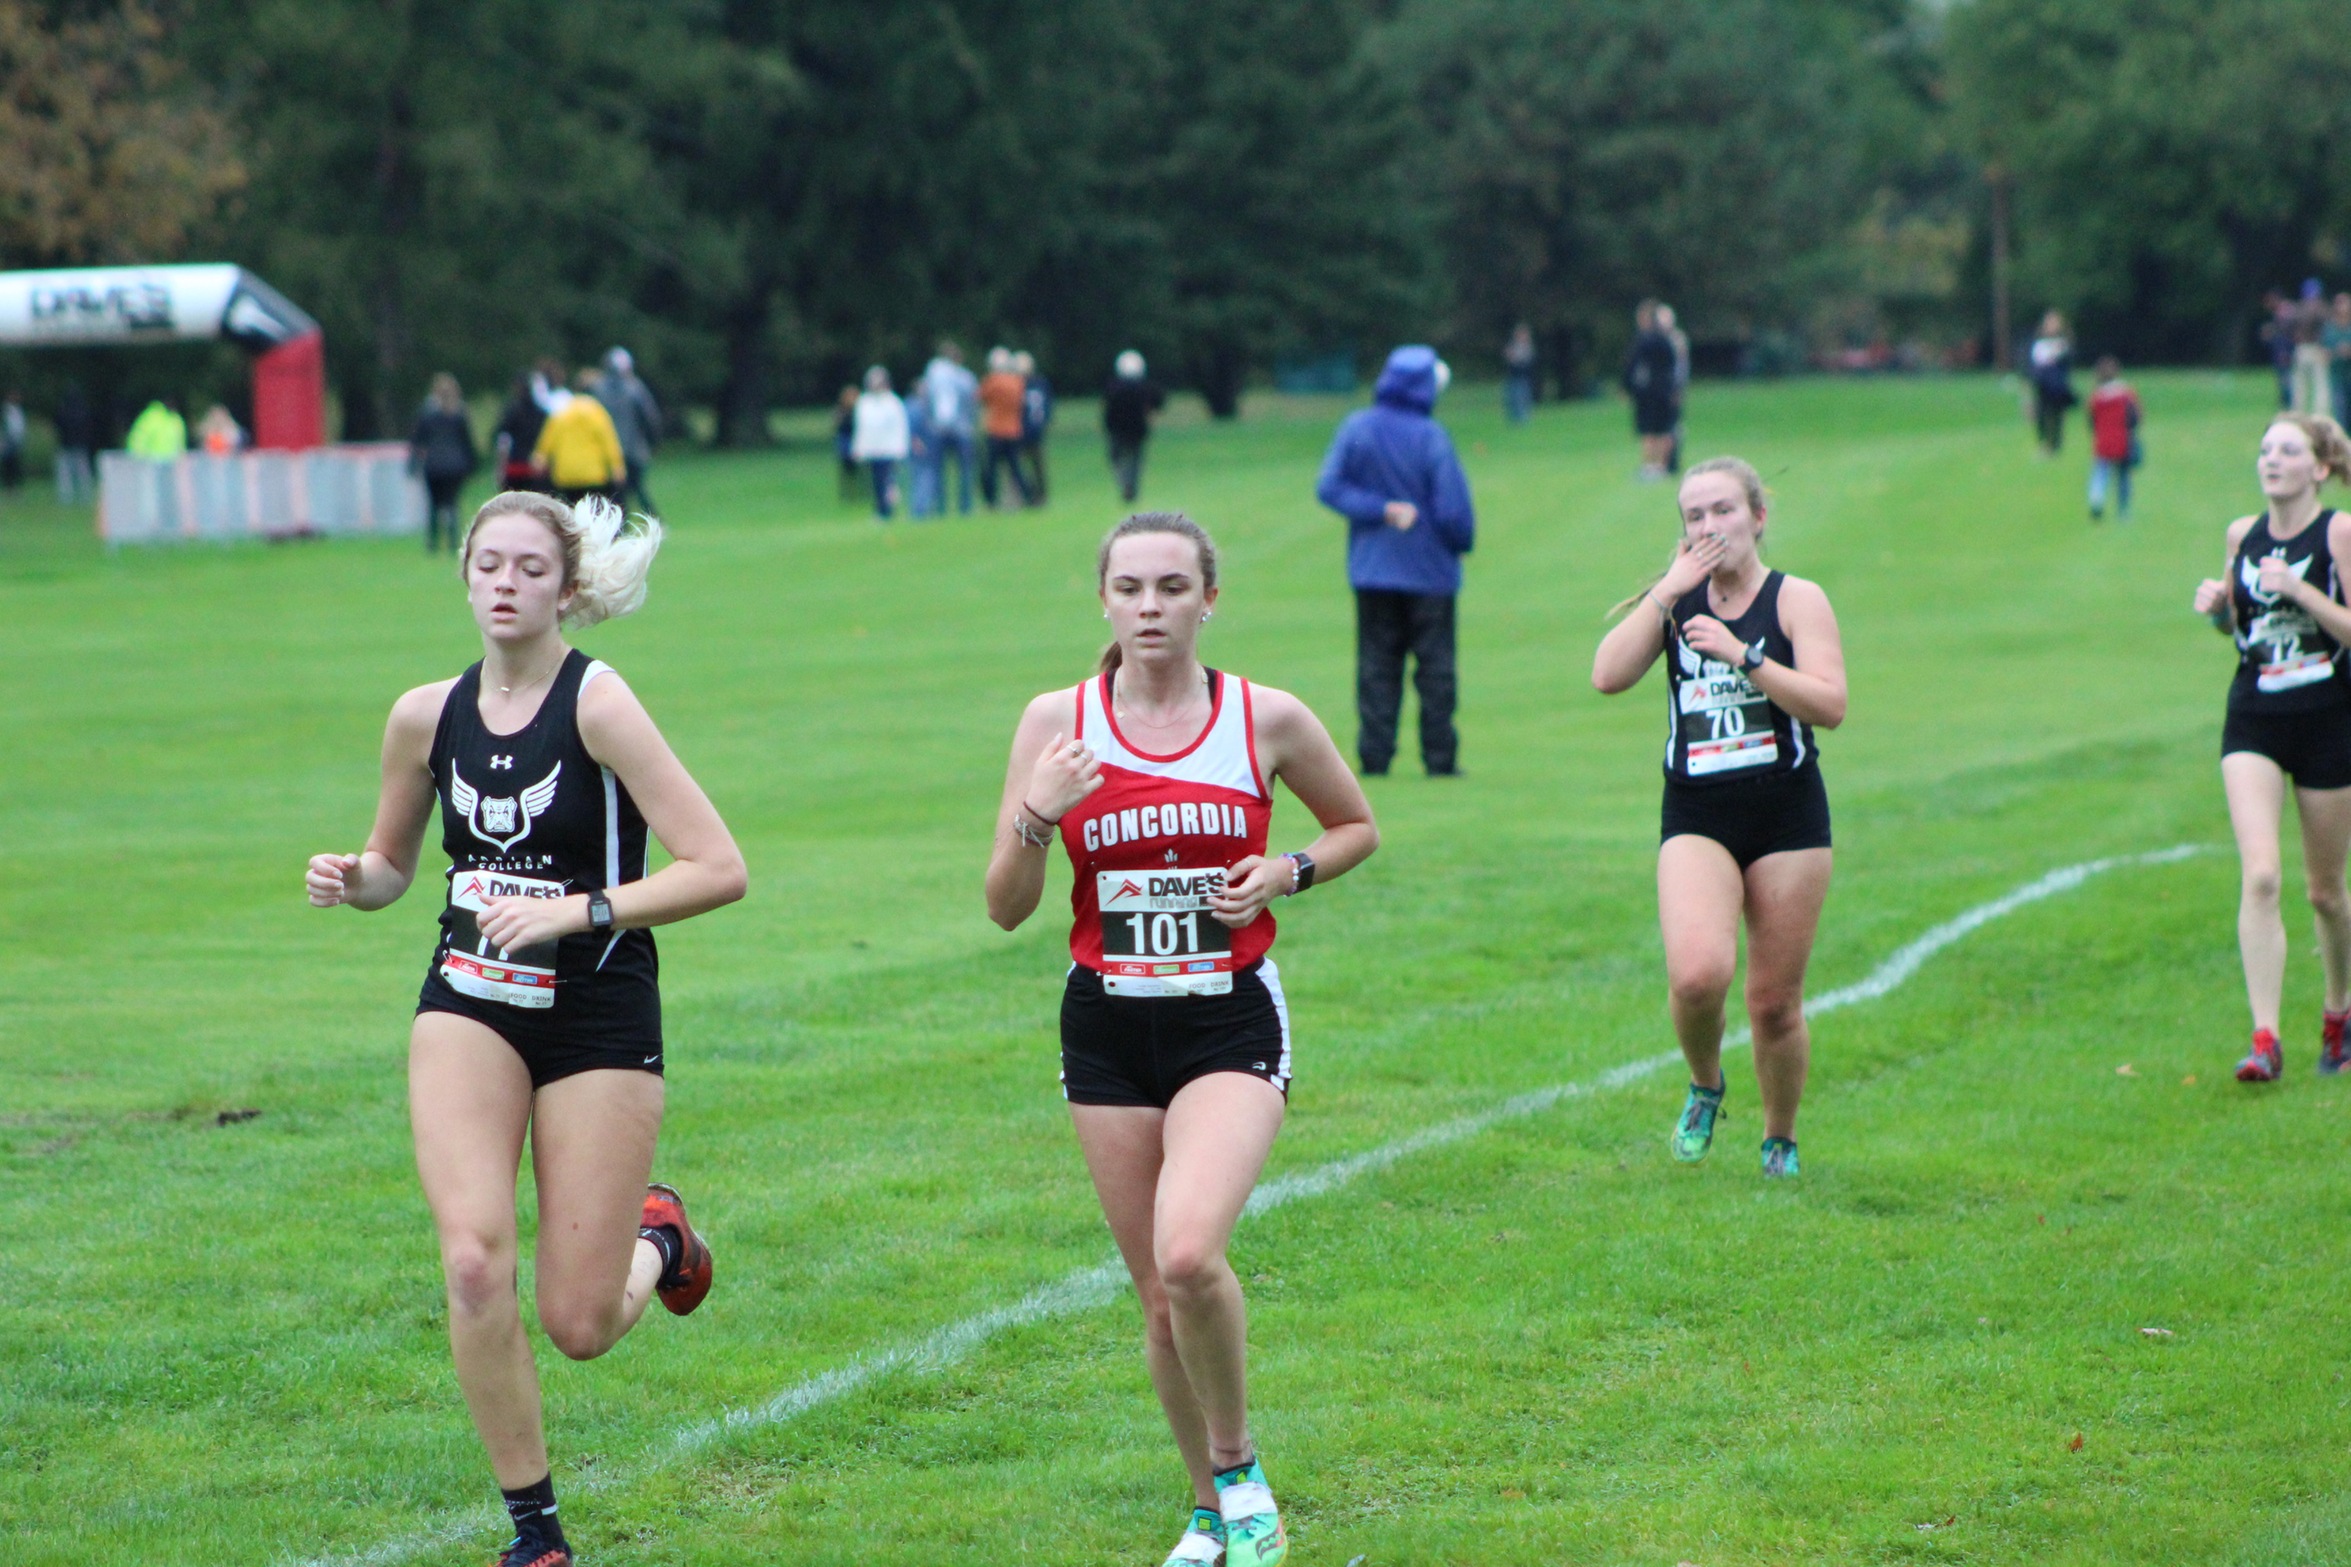 Women’s Cross Country team competes at Raider Invitational